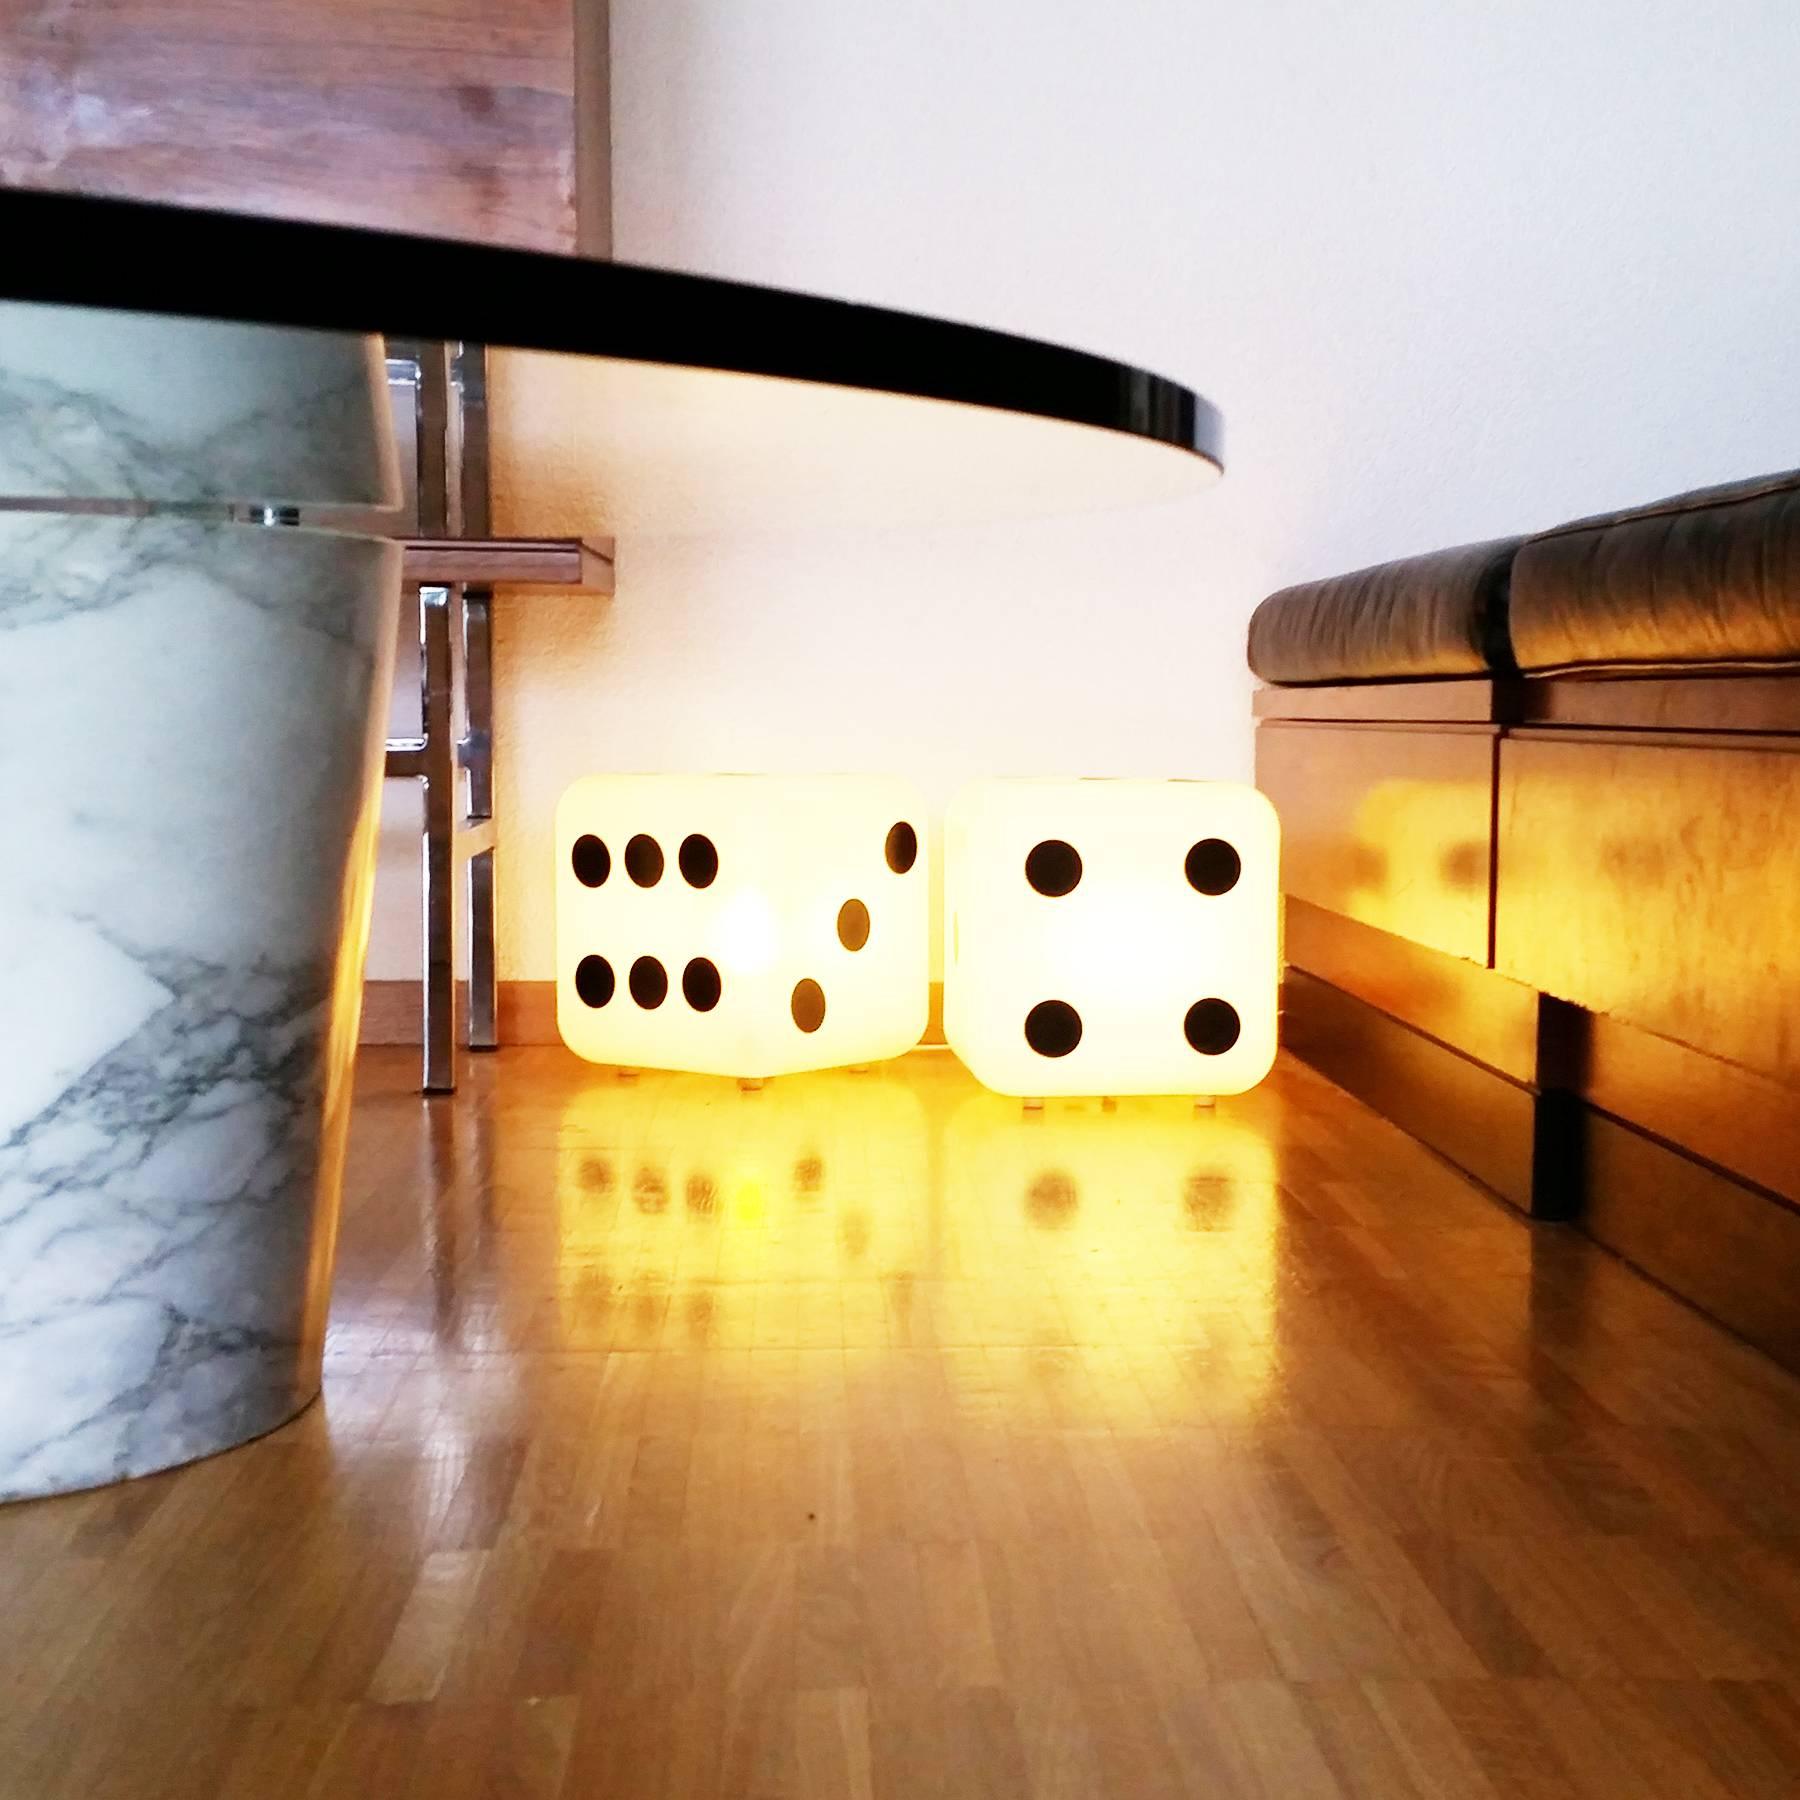 Nice set of two lighted dices, made by TIFF in Switzerland in the late 1970.
The light is soft and warm, and the lamps can be placed together or individually.
Perfect for a wide range of use, from the children's room to the men's house bar.